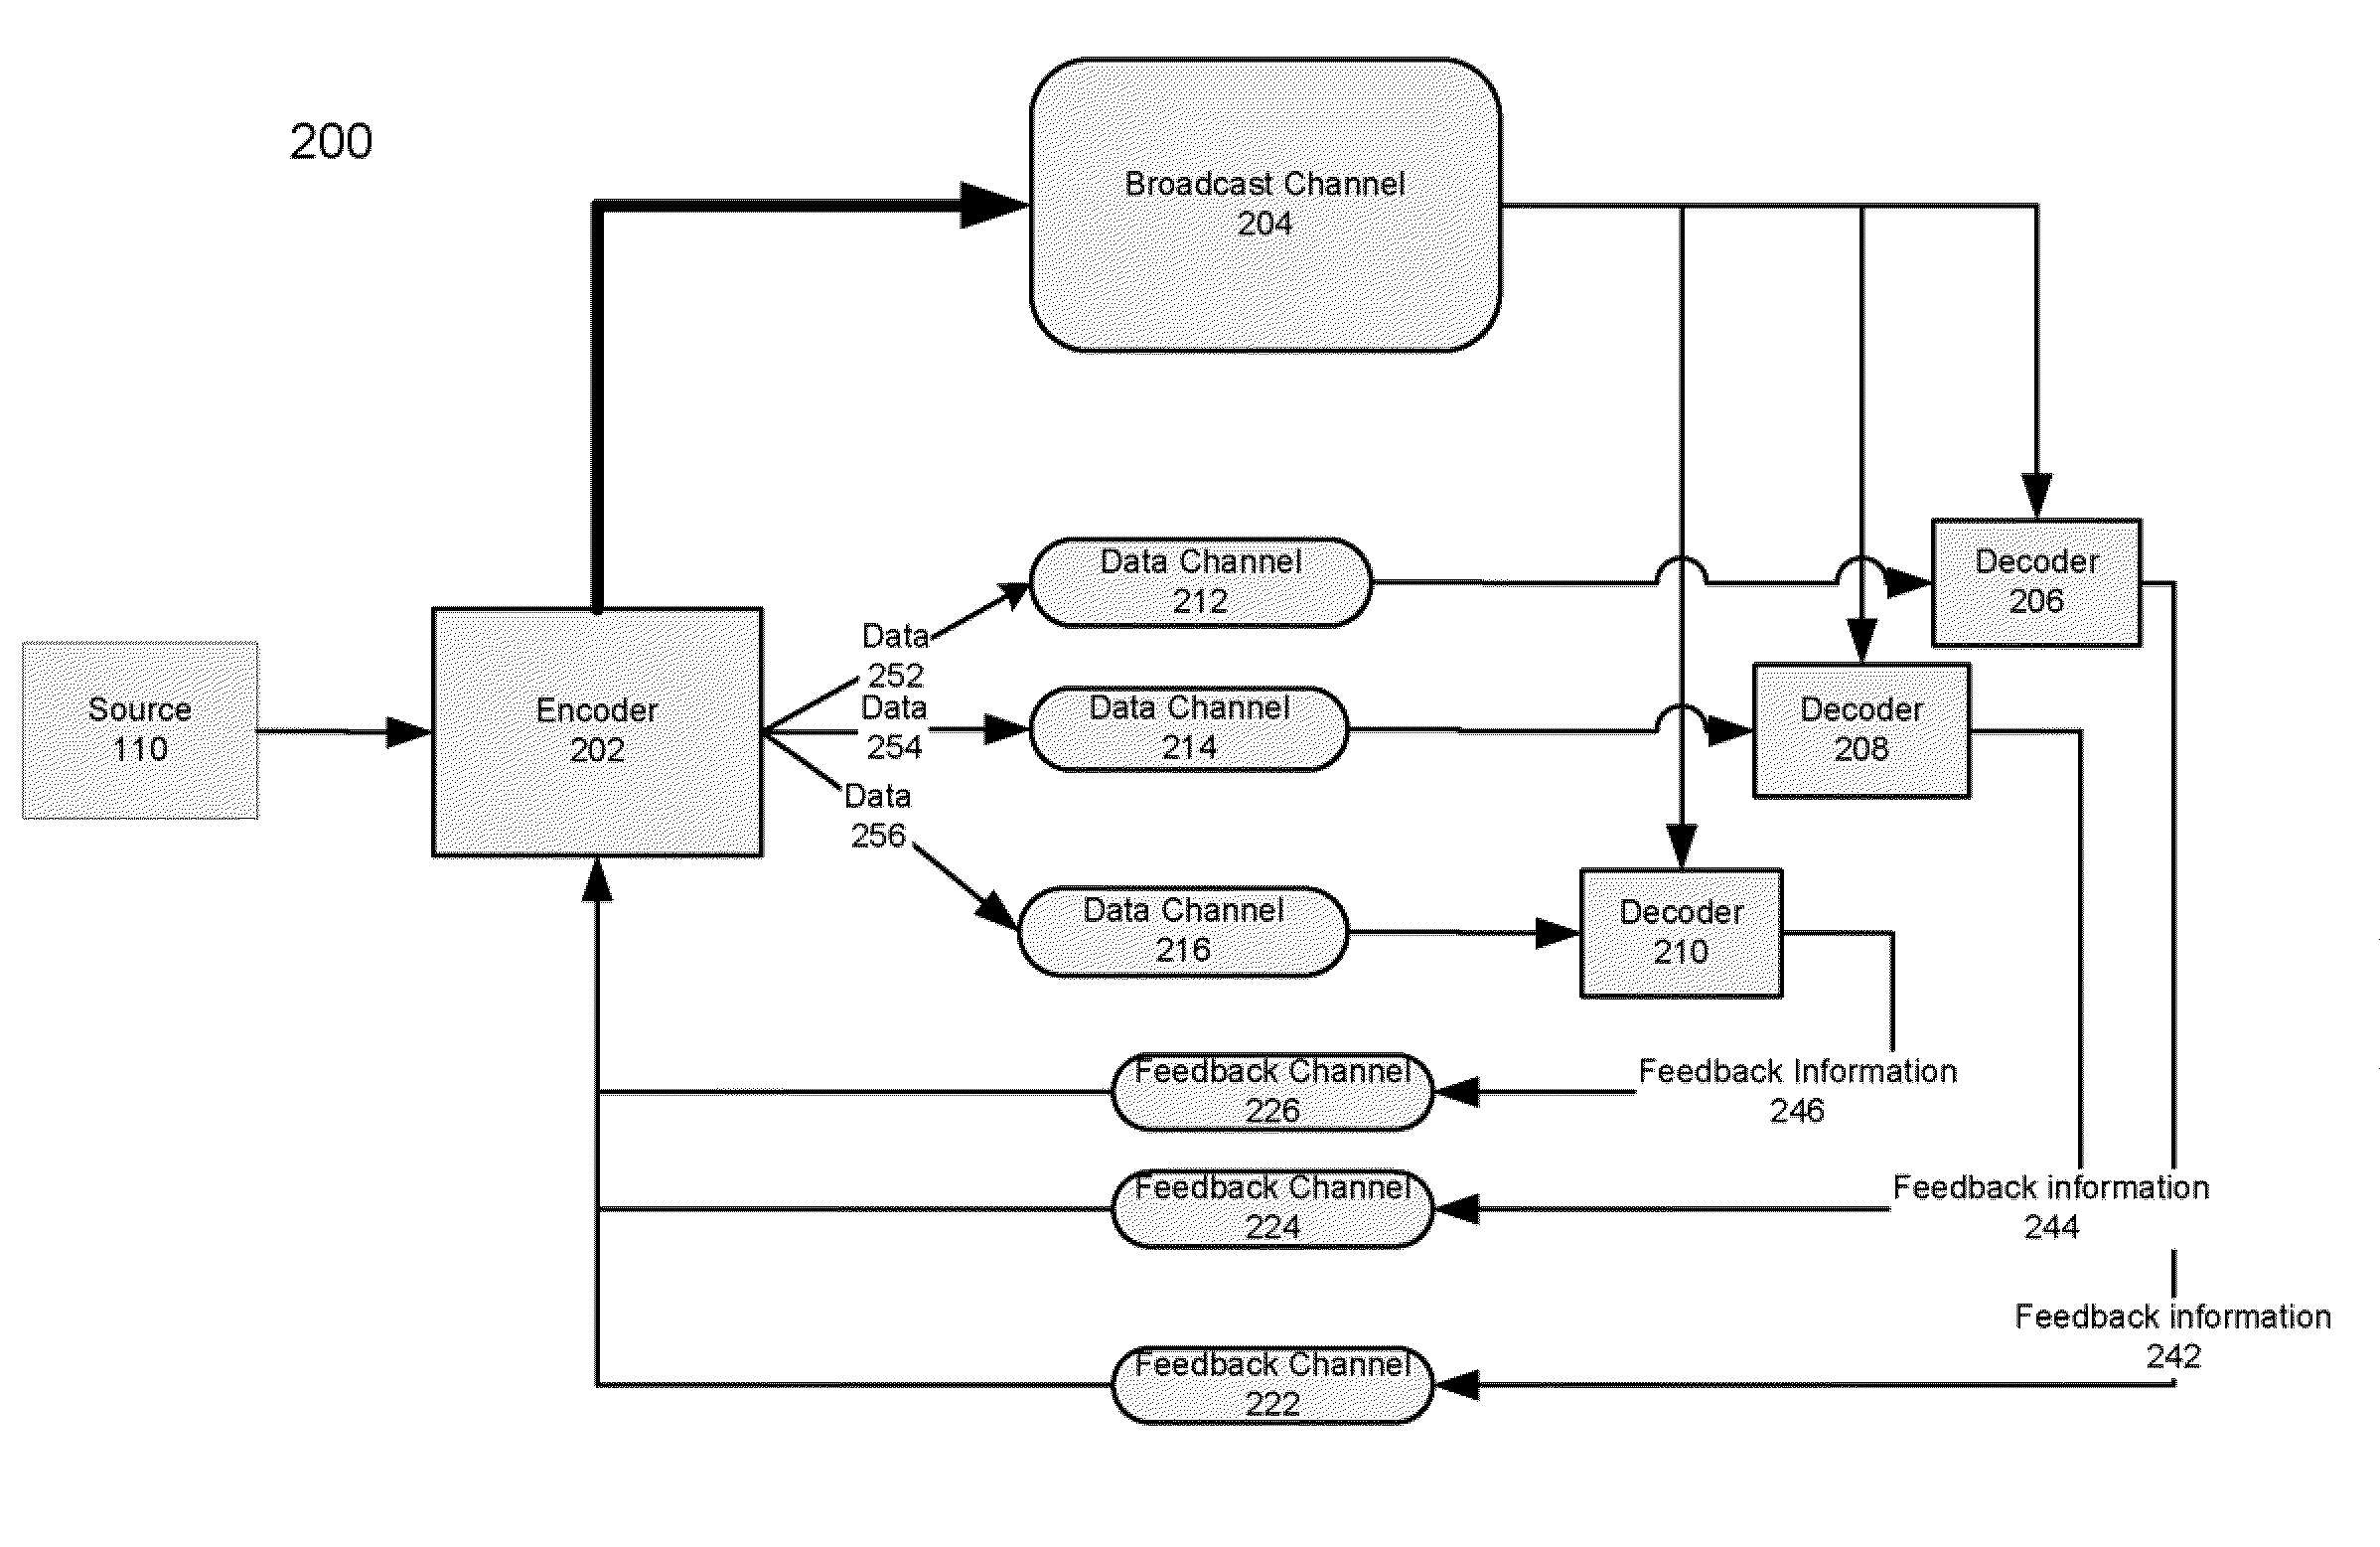 Systems and methods for transmitting and receiving data streams with feedback information over a lossy network